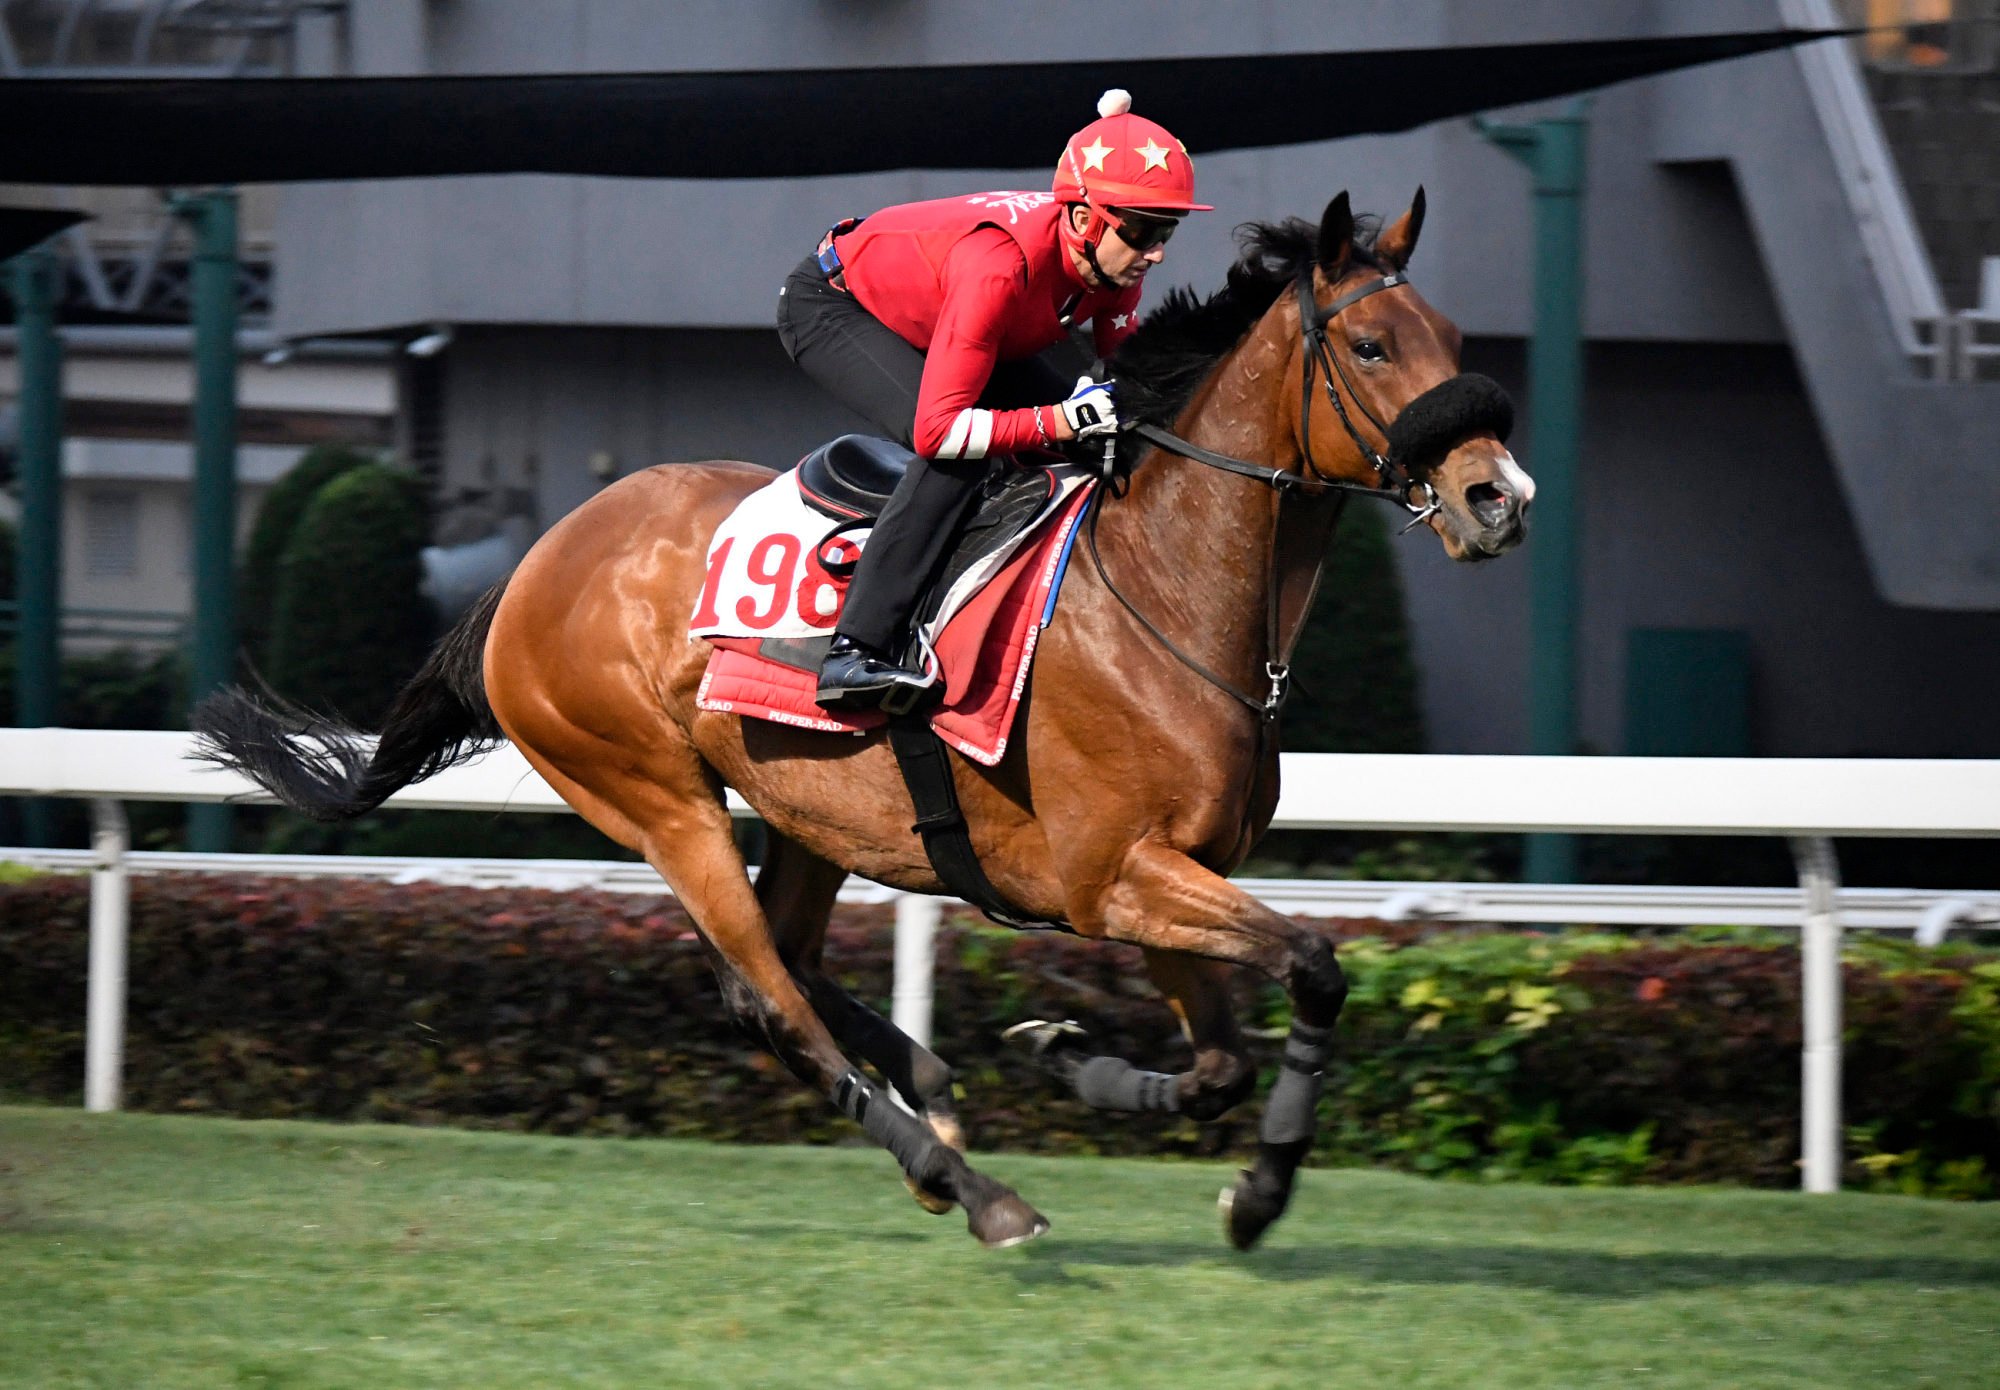 Russian Emperor gallops on the Sha Tin turf under Douglas Whyte earlier this week.